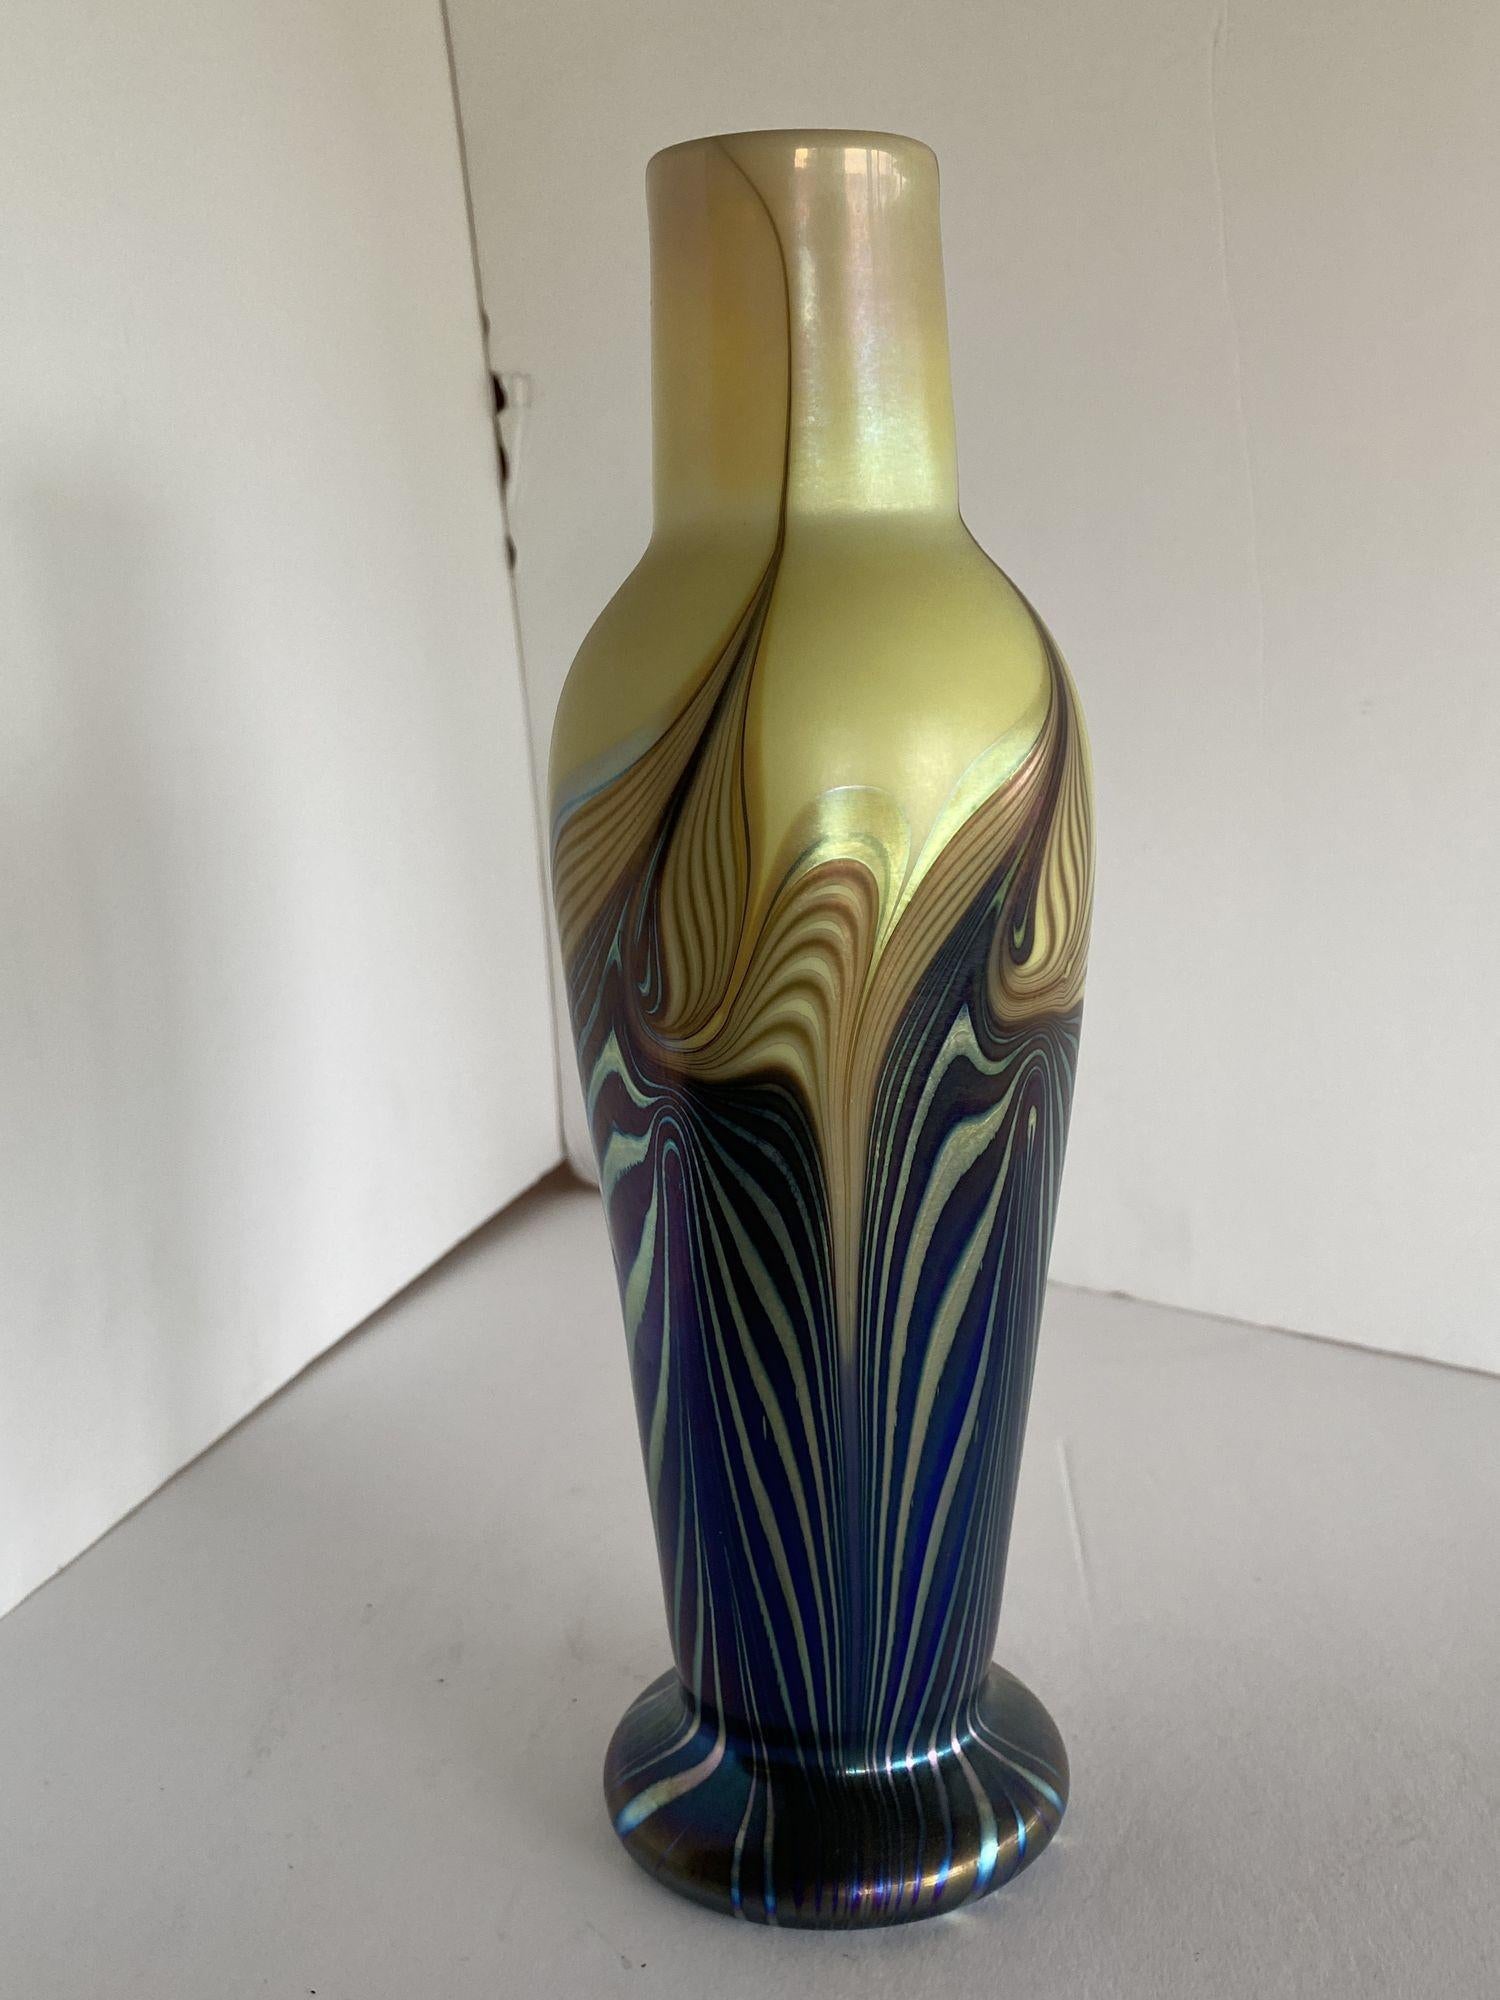 Iridescent 7 Color Art Glass Vase by Lundberg Studio In Excellent Condition For Sale In Van Nuys, CA